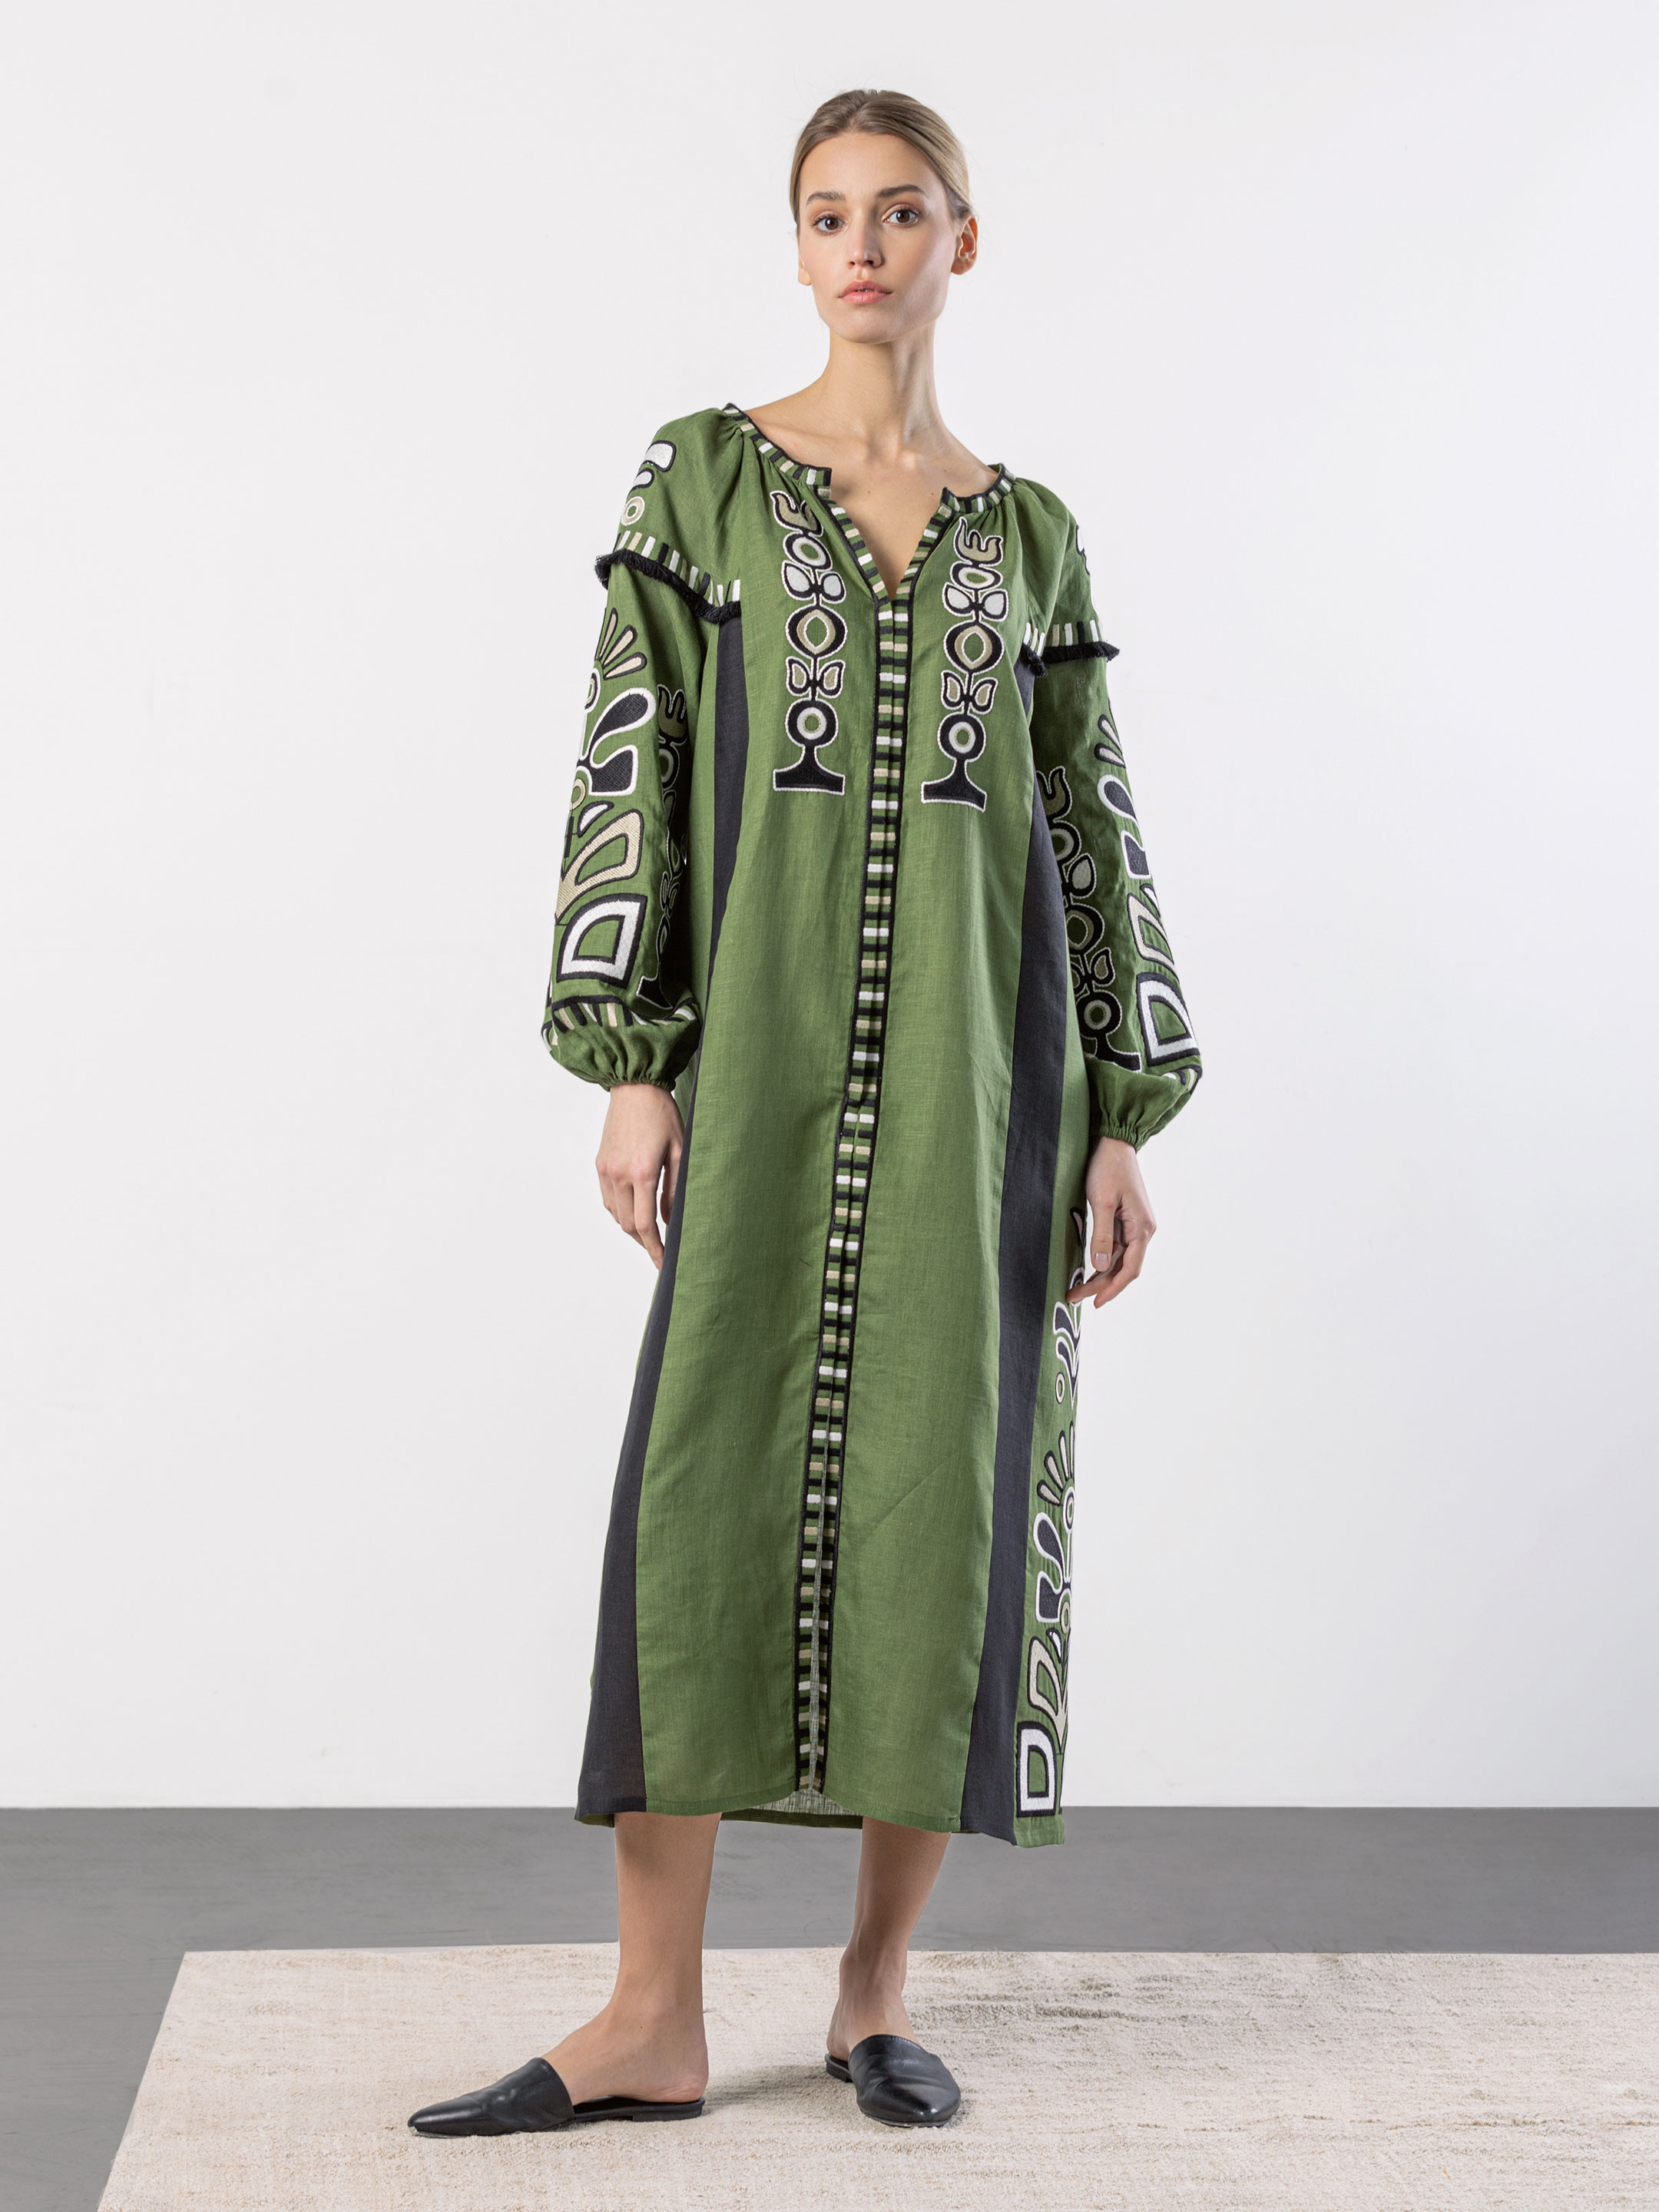 Green dress with black applique and embroidery VILHA - photo 1